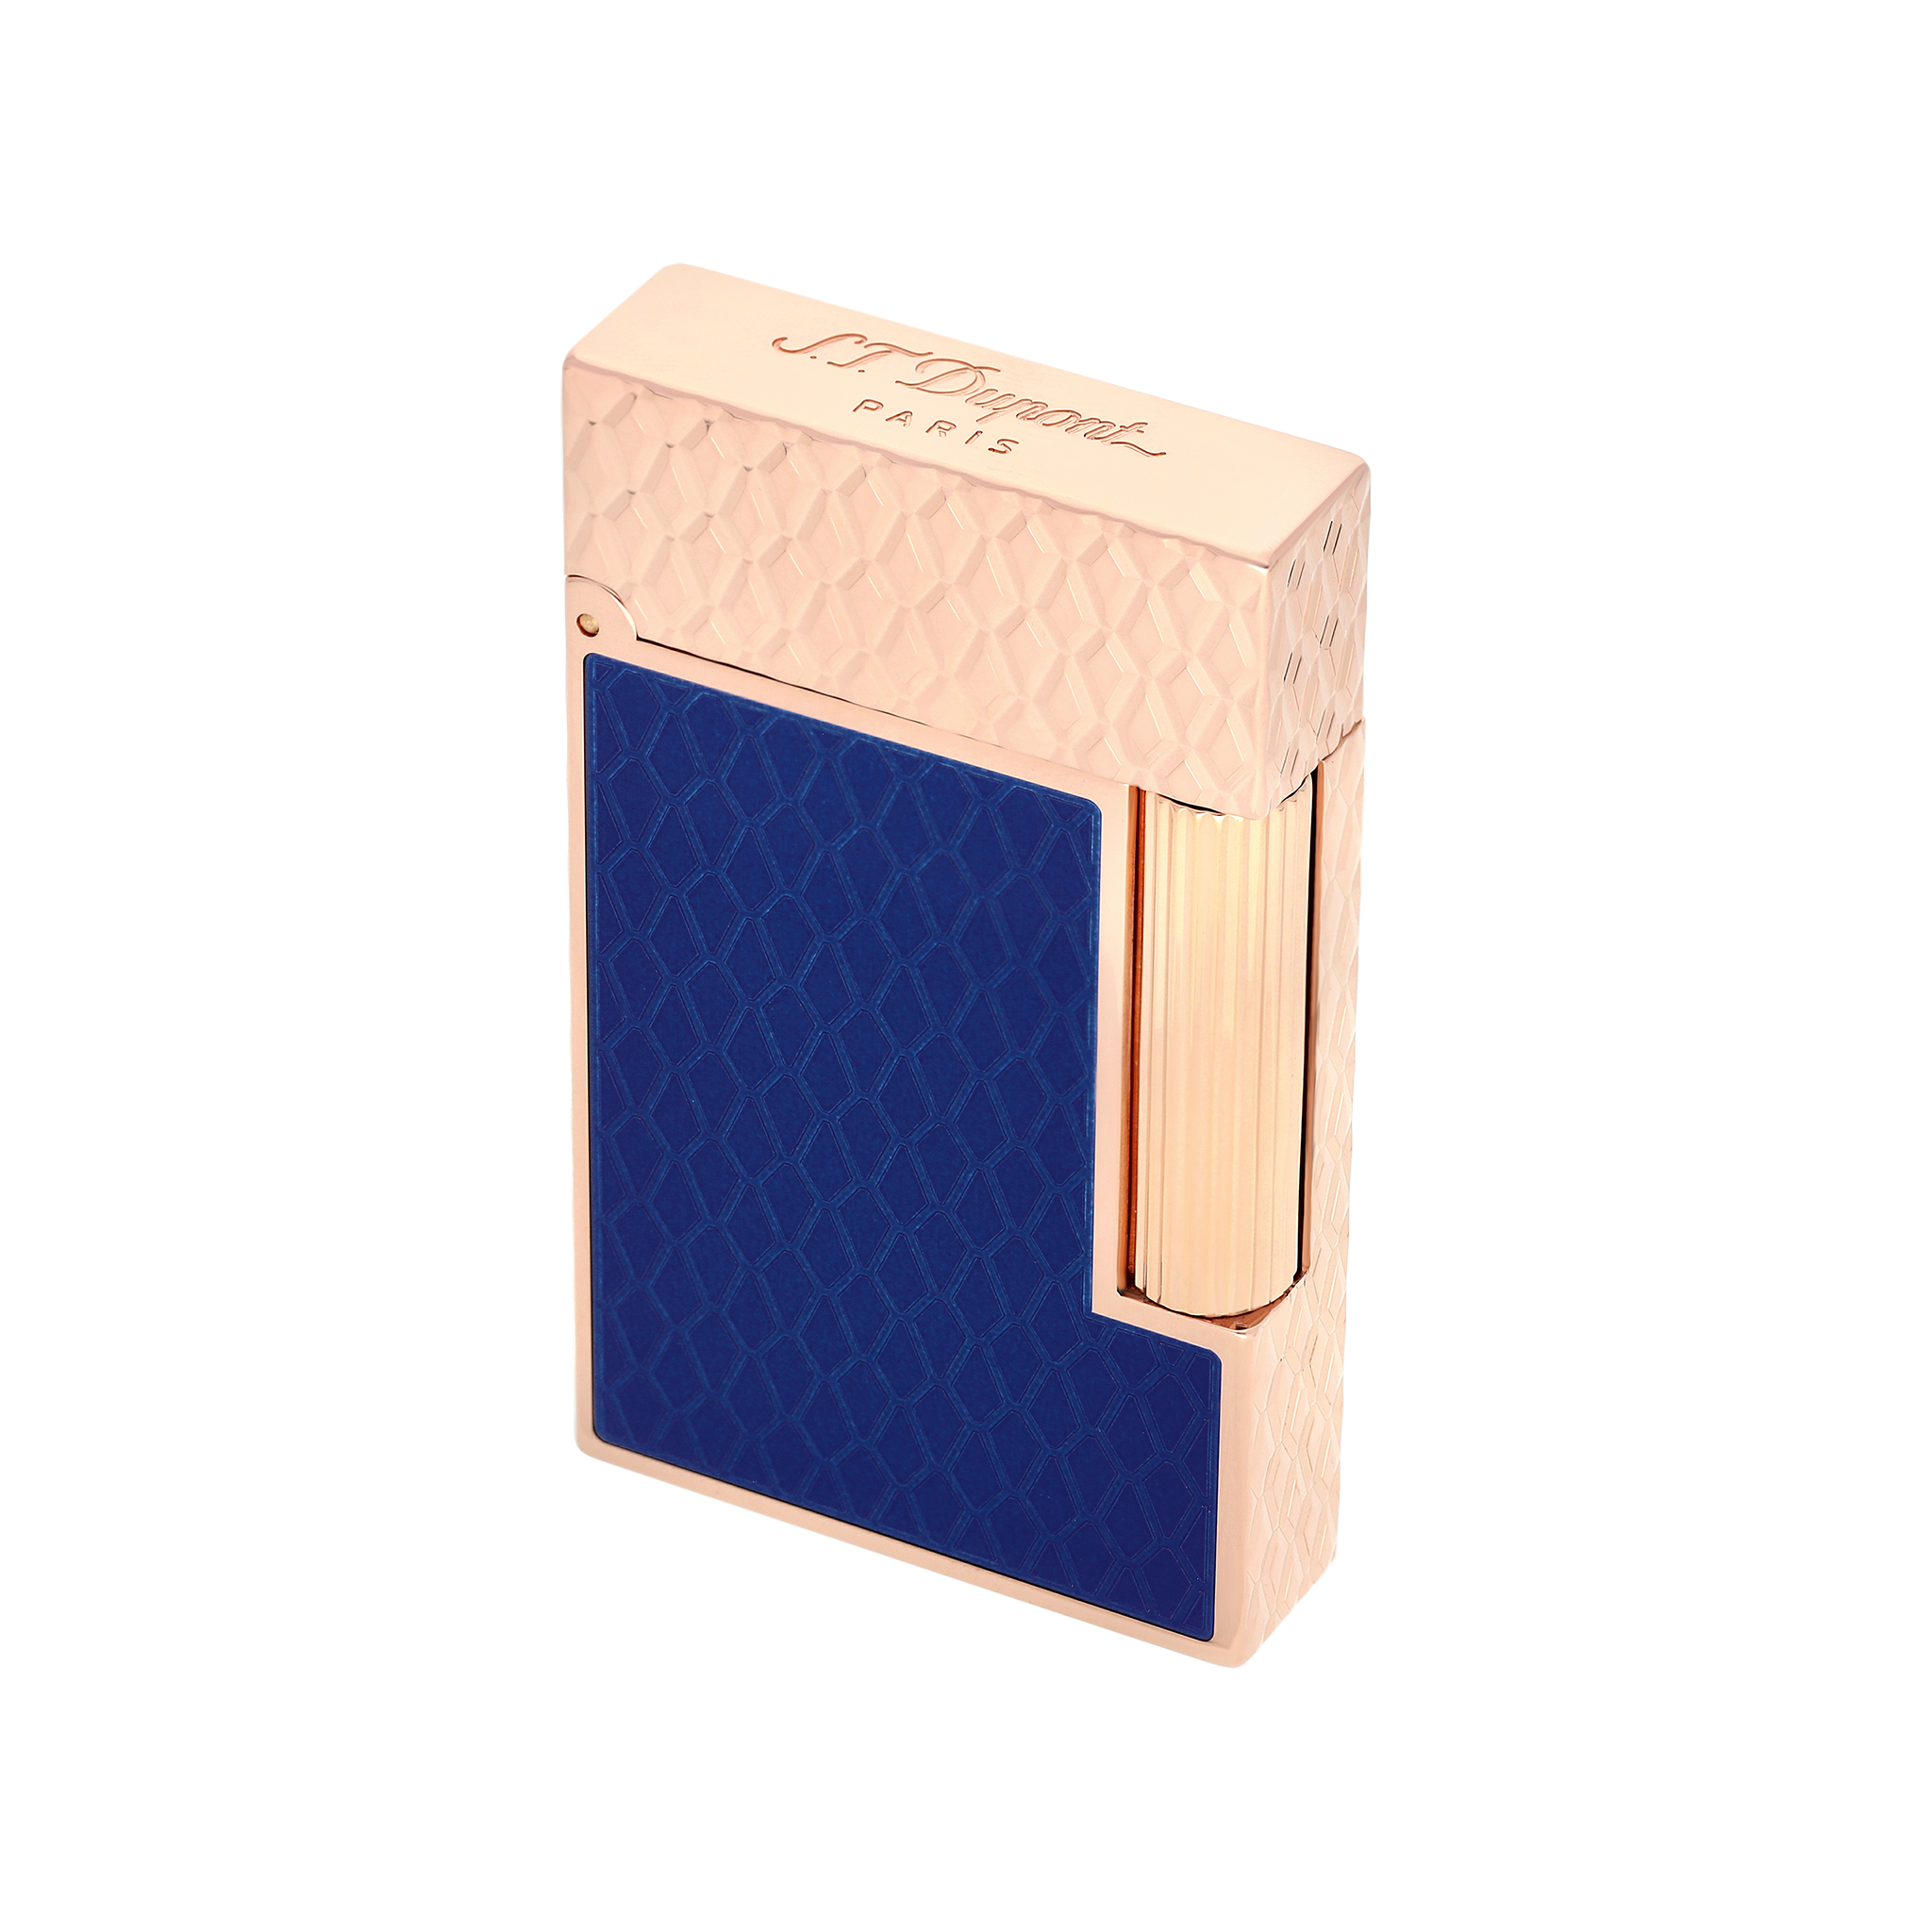 DUPONT blue/ Ligne under | pink - 2 lacquer/ Bright lacquer – lighters line Guilloche gold luxury S.T.